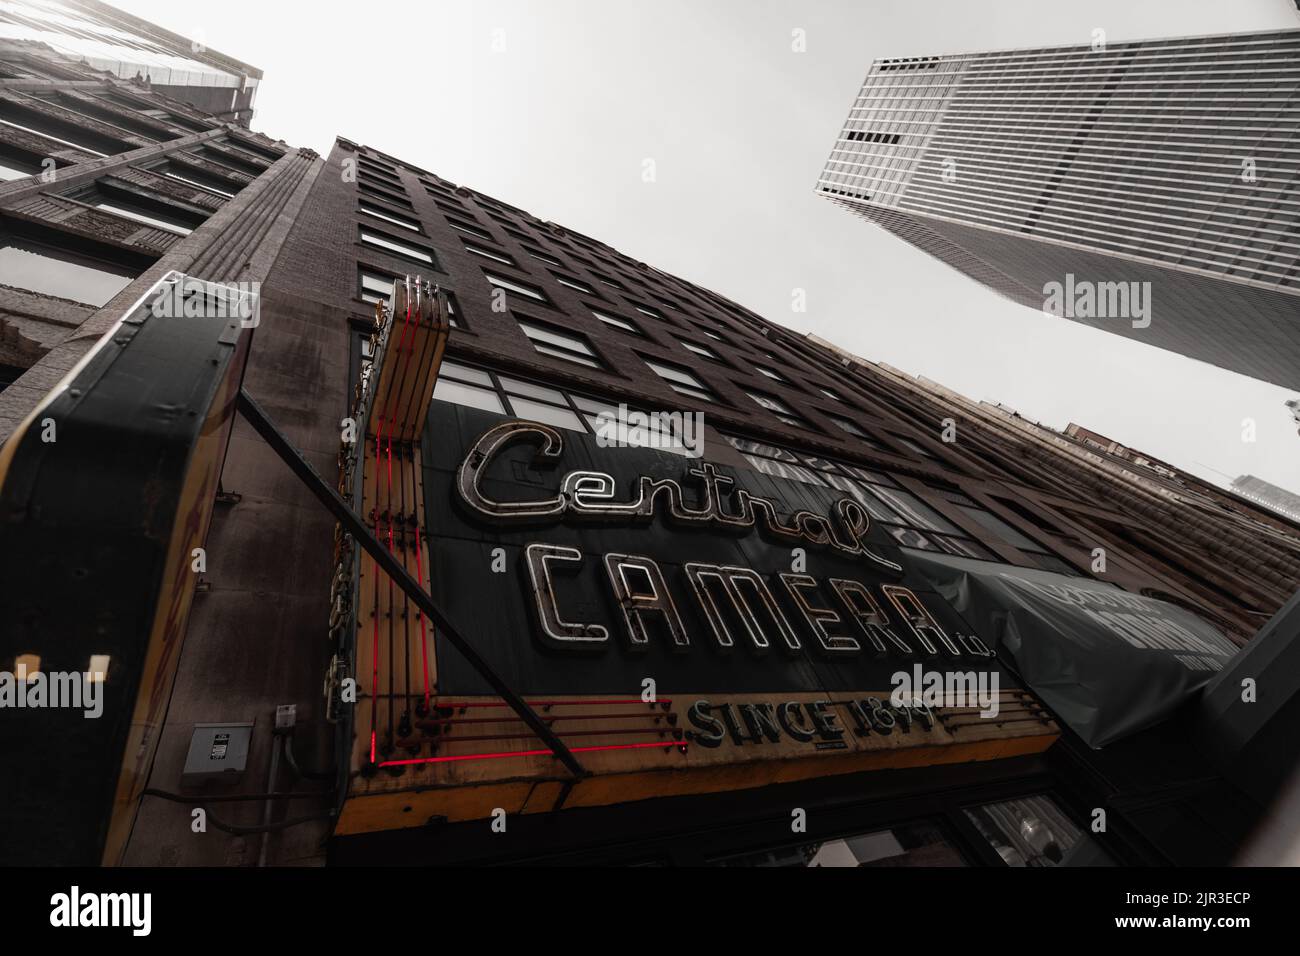 A low angle shot of Central cameras Co store front sign Stock Photo